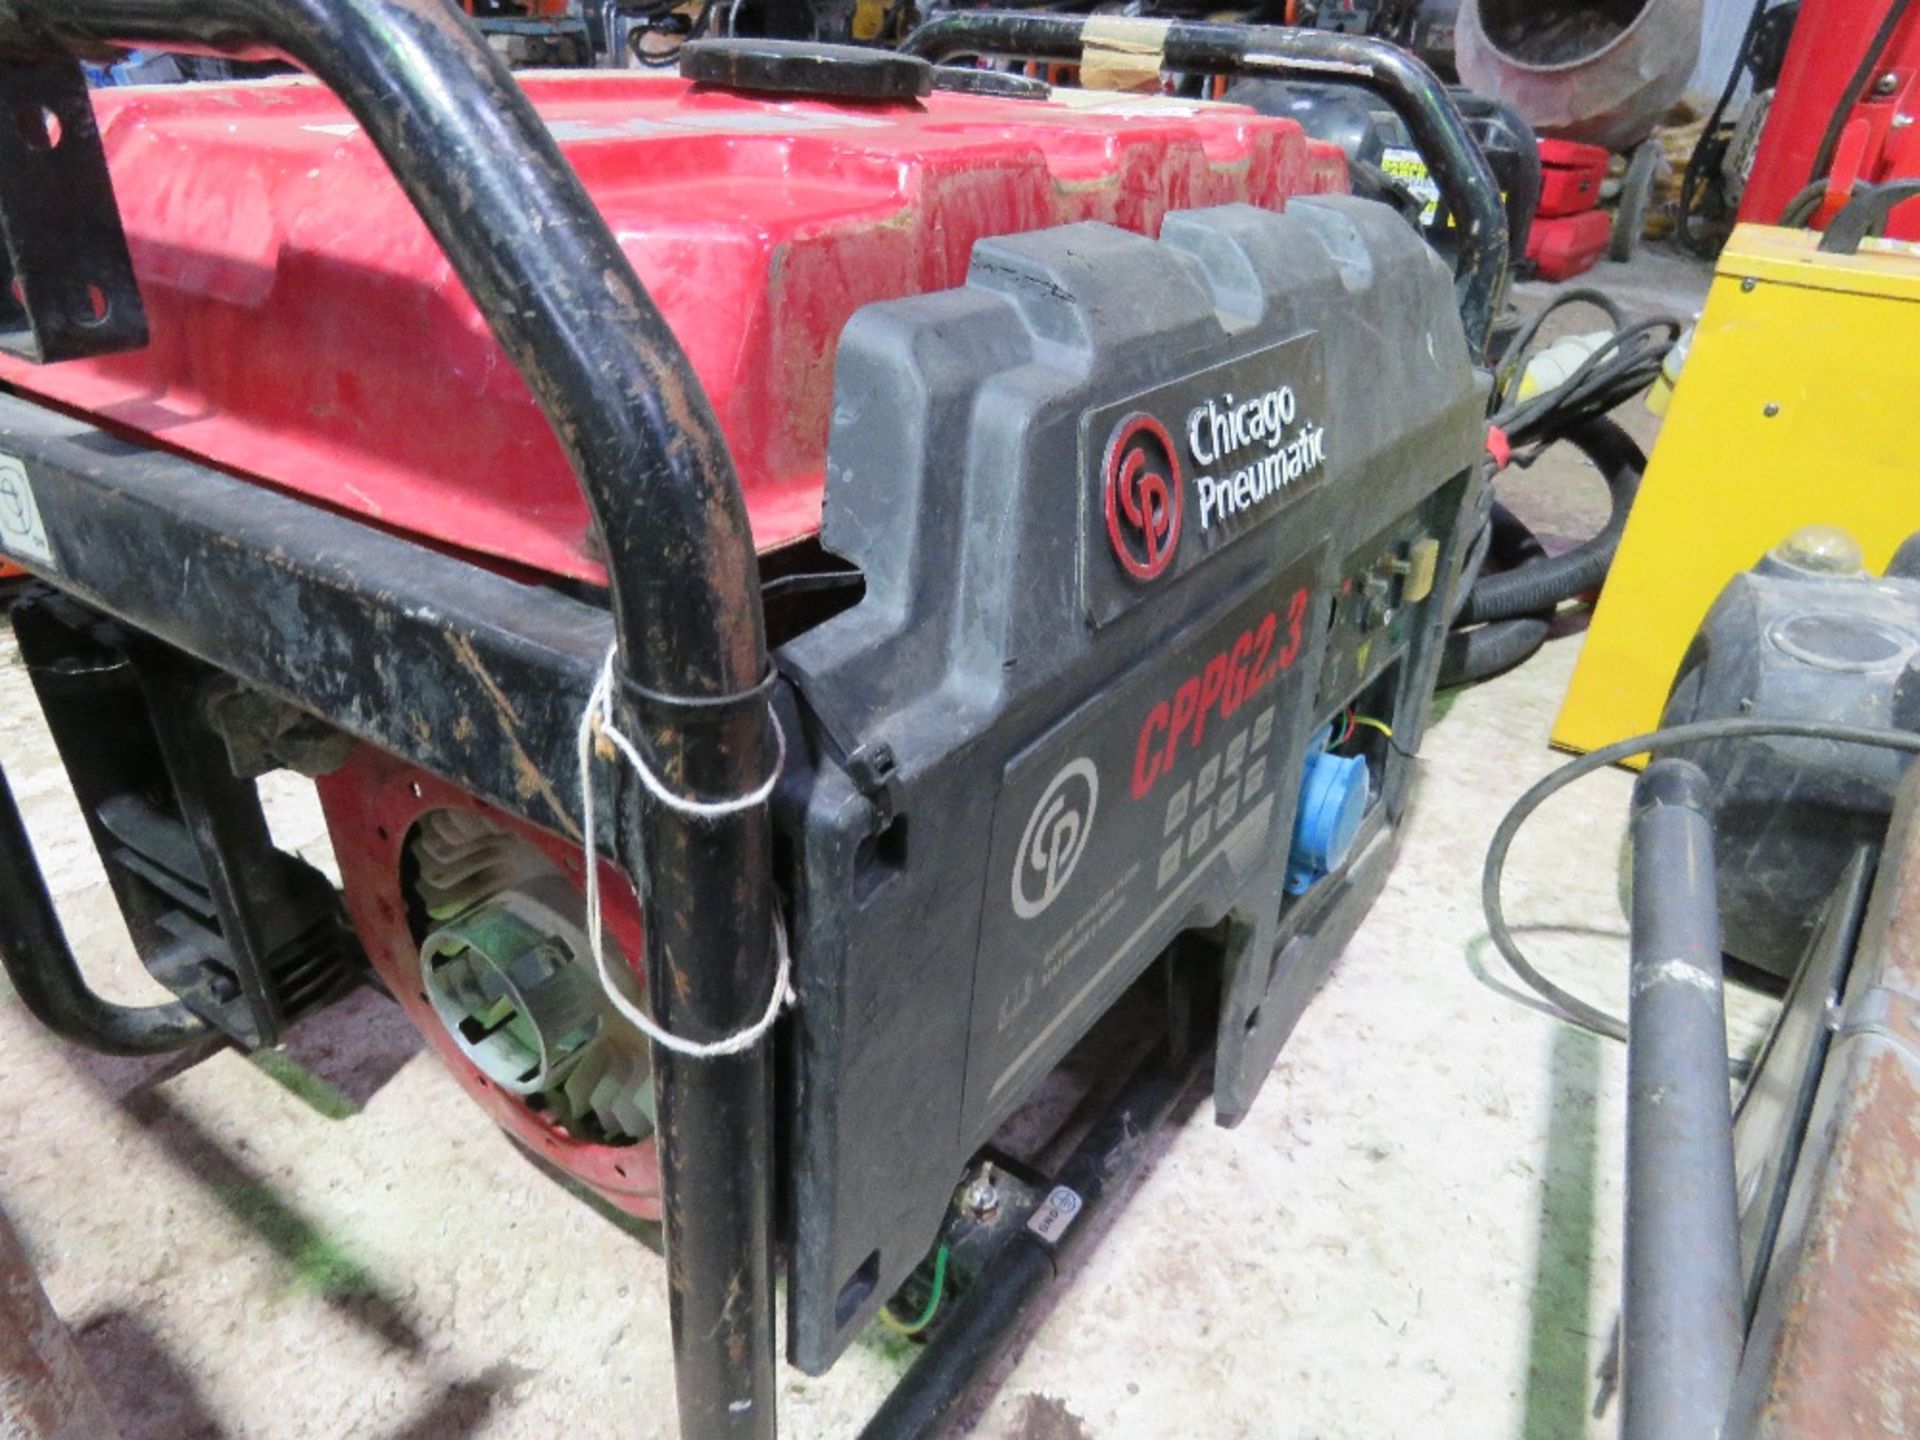 CPPG2.3 PETROL ENGINED GENERATOR. - Image 2 of 3